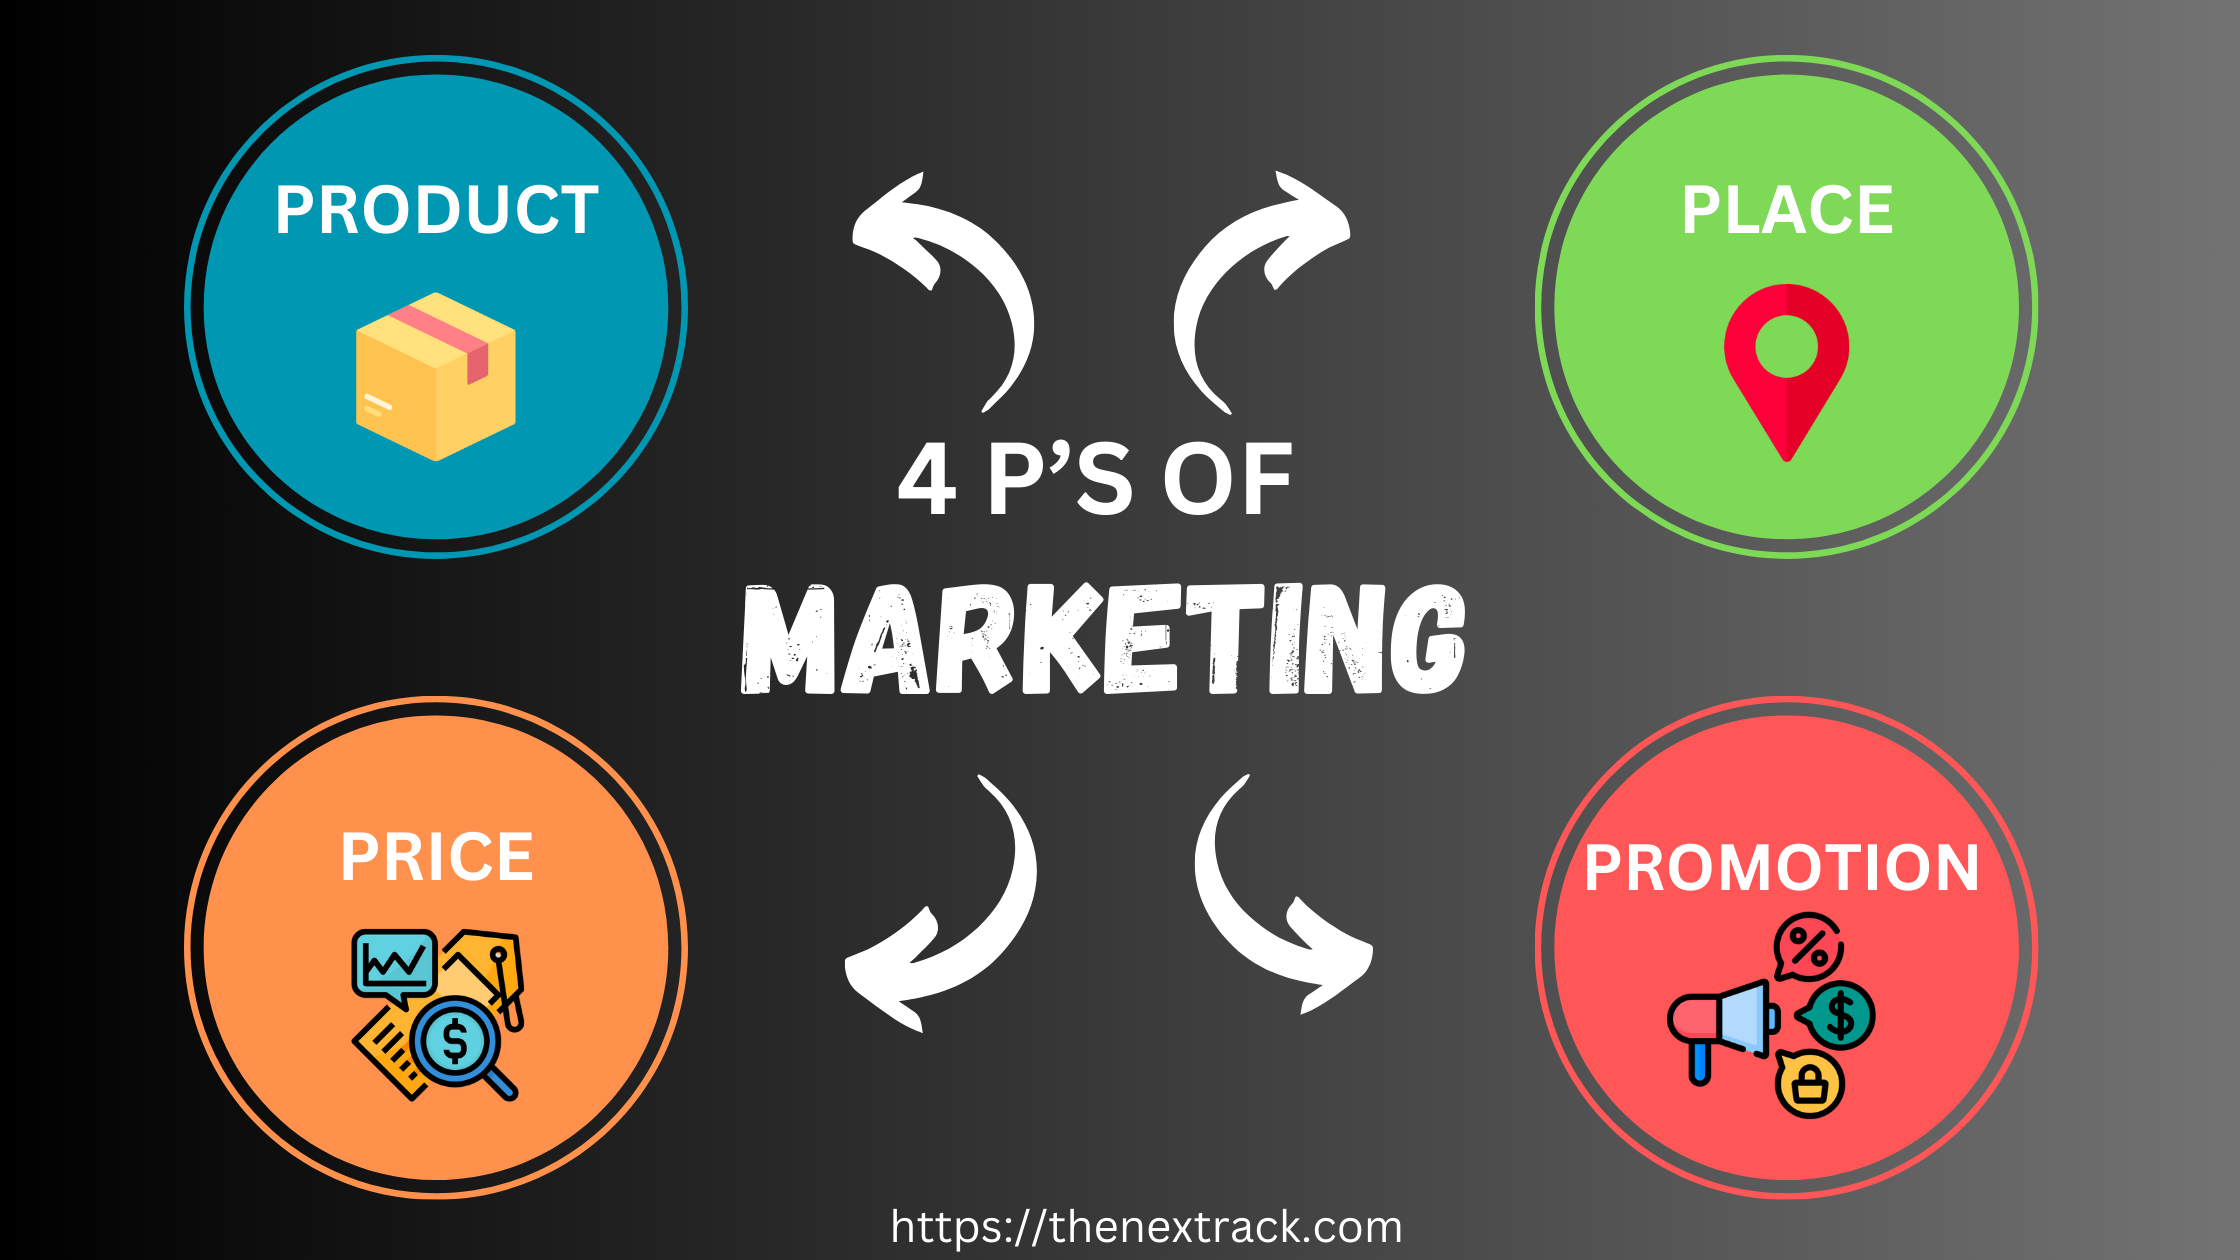 The 4 Ps of Marketing: Product, Price, Place, Promotion